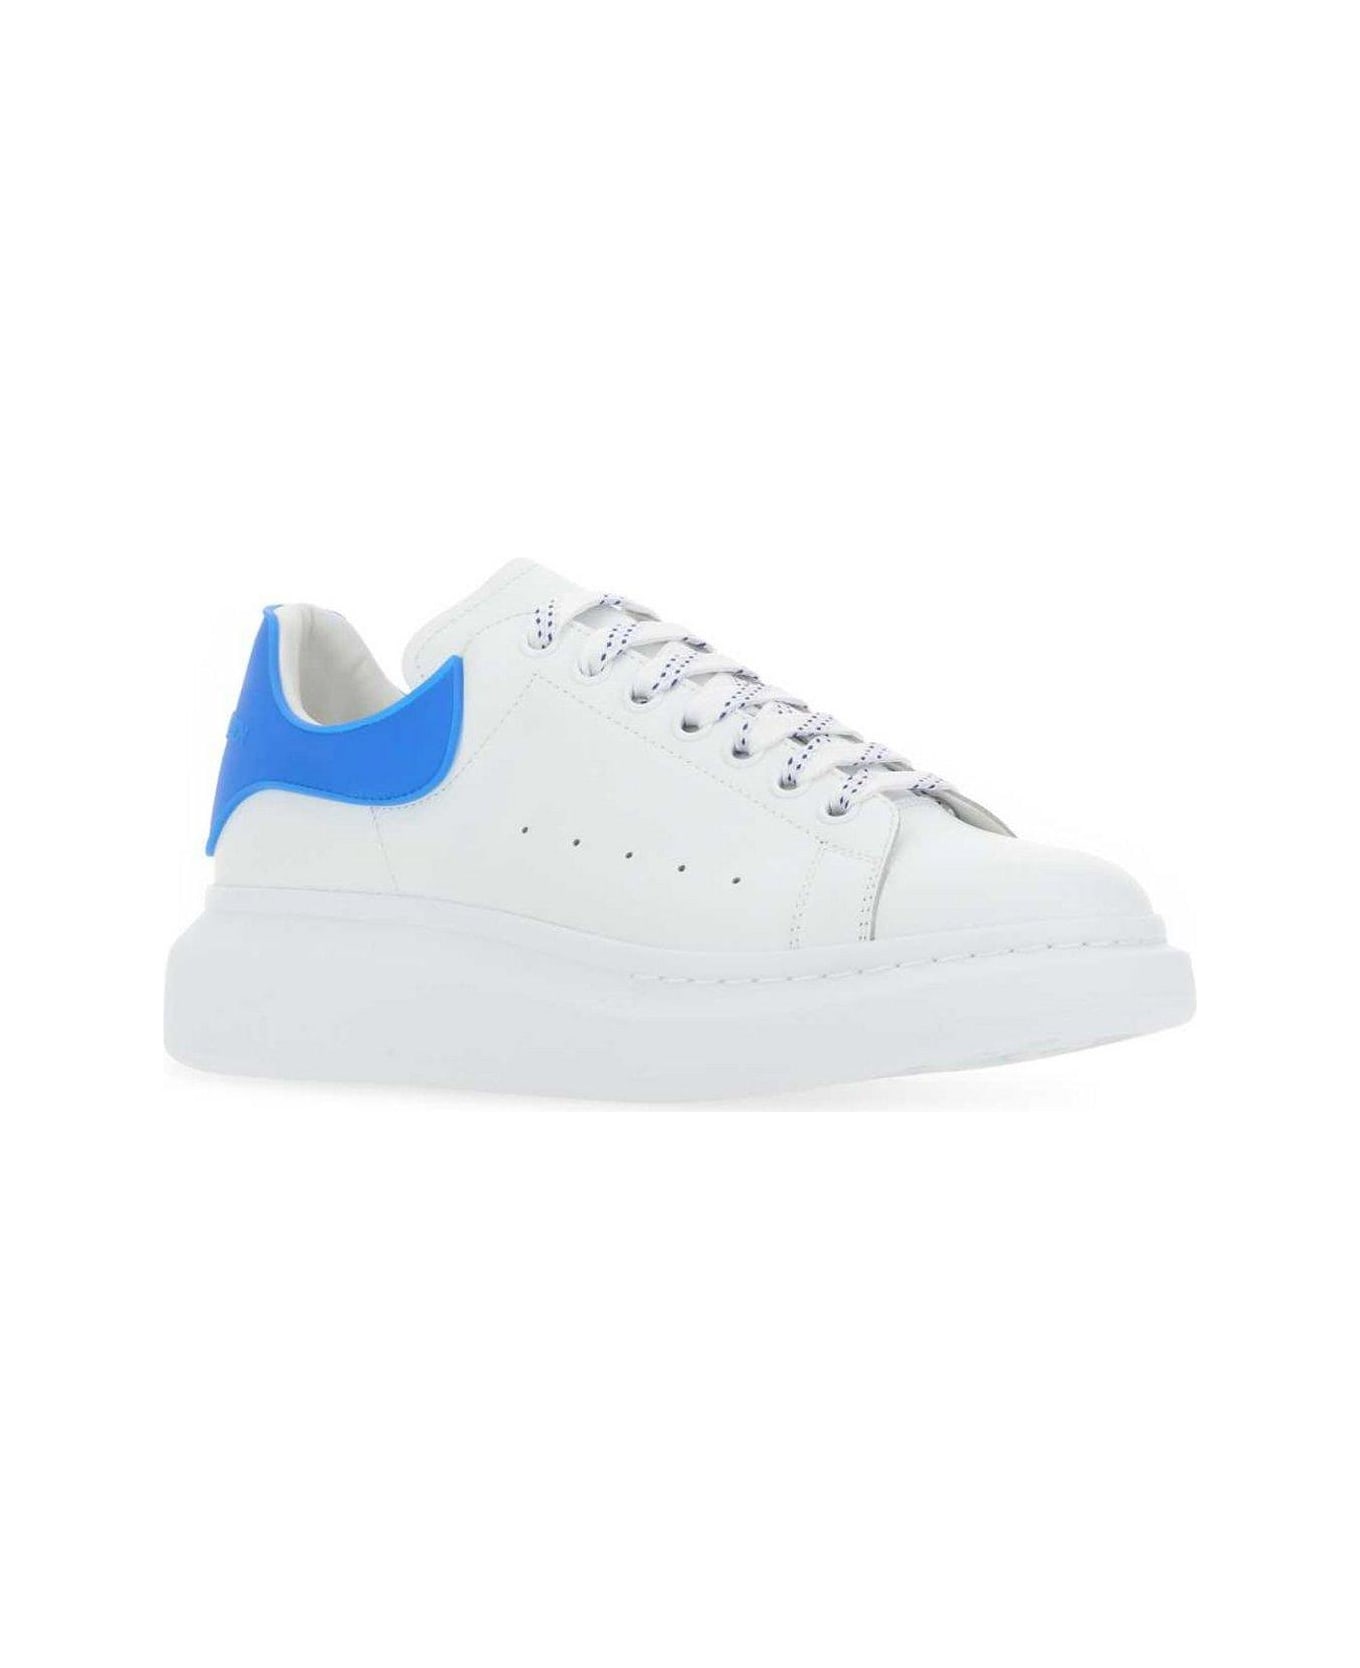 Alexander McQueen Logo Detailed Lace-up Sneakers - White/blue